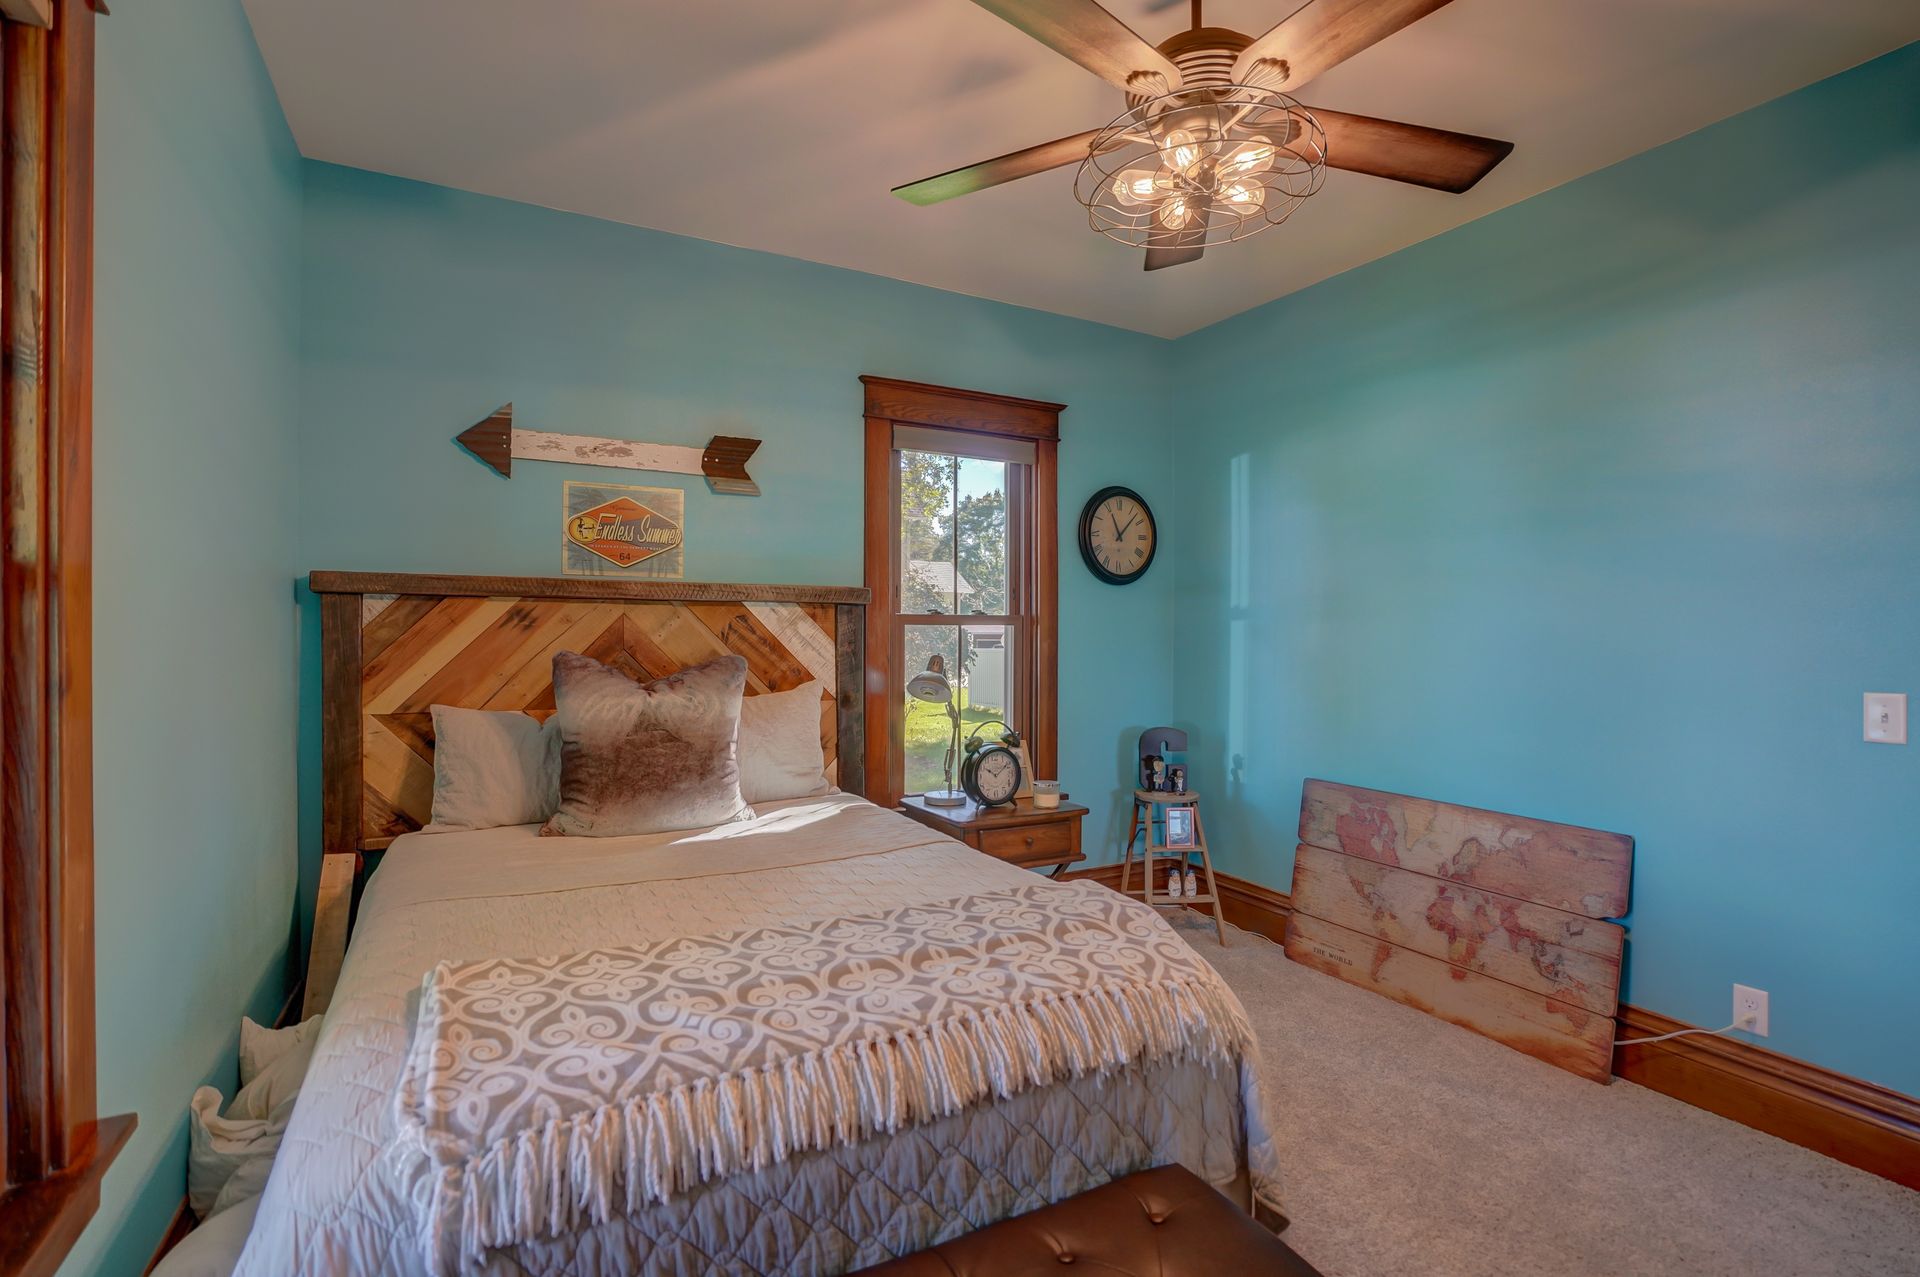 A bedroom with blue walls , a bed , a ceiling fan and a window.